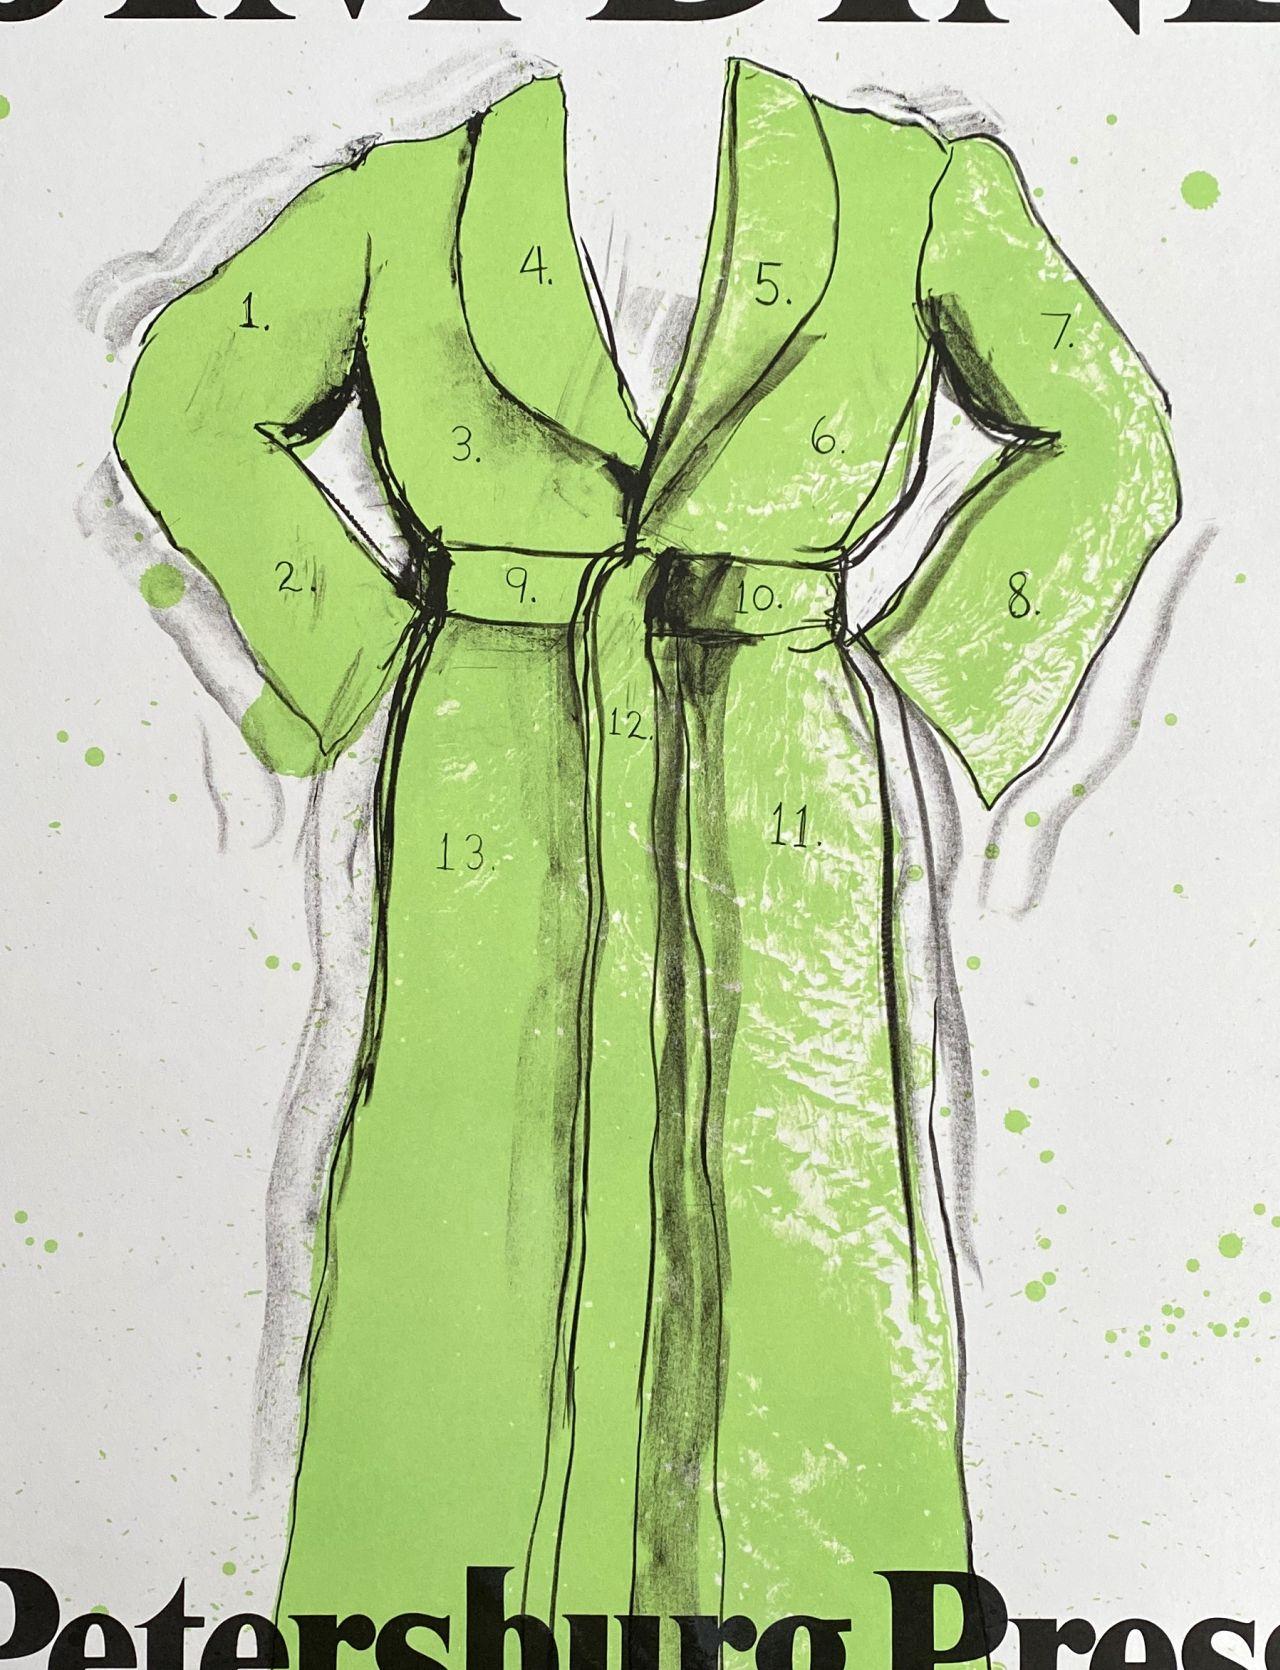 The Green Coat - Original Lithograph Hand Signed In Pencil - Print by Jim Dine